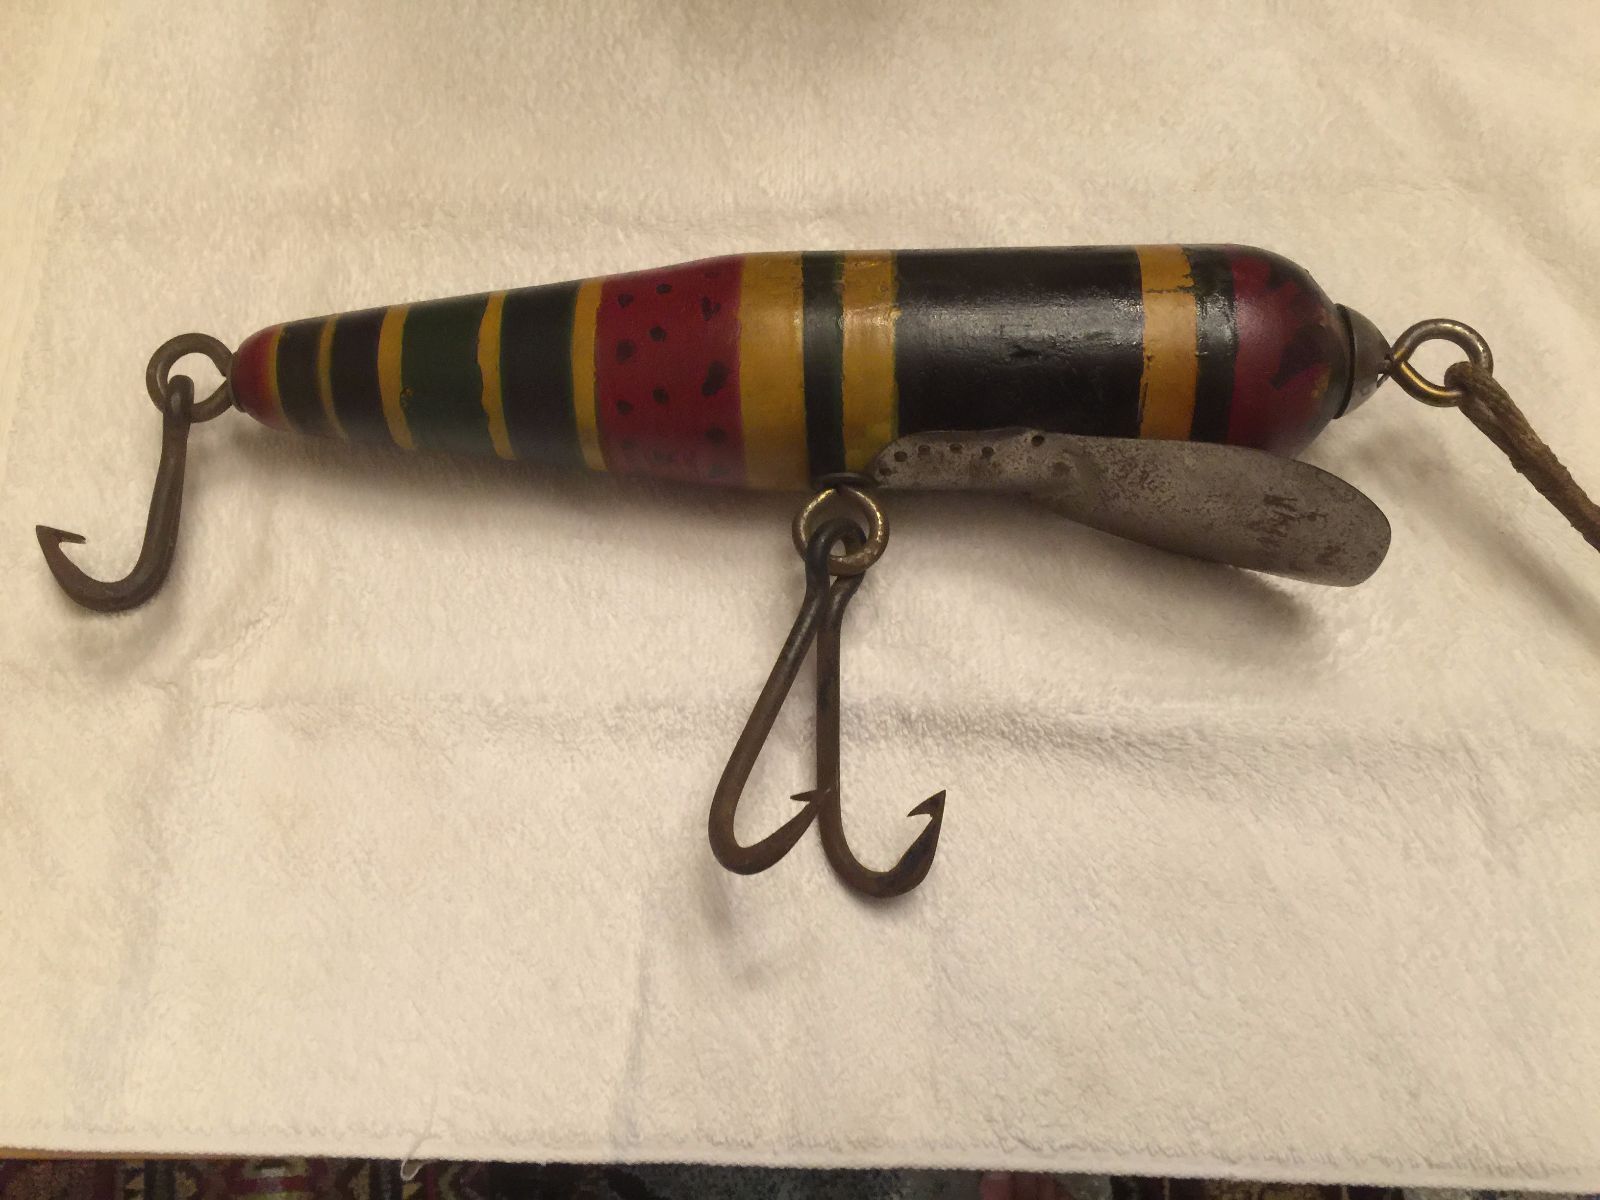 Chance's Folk Art Fishing Lure Research Blog: Chance's Weekly likes